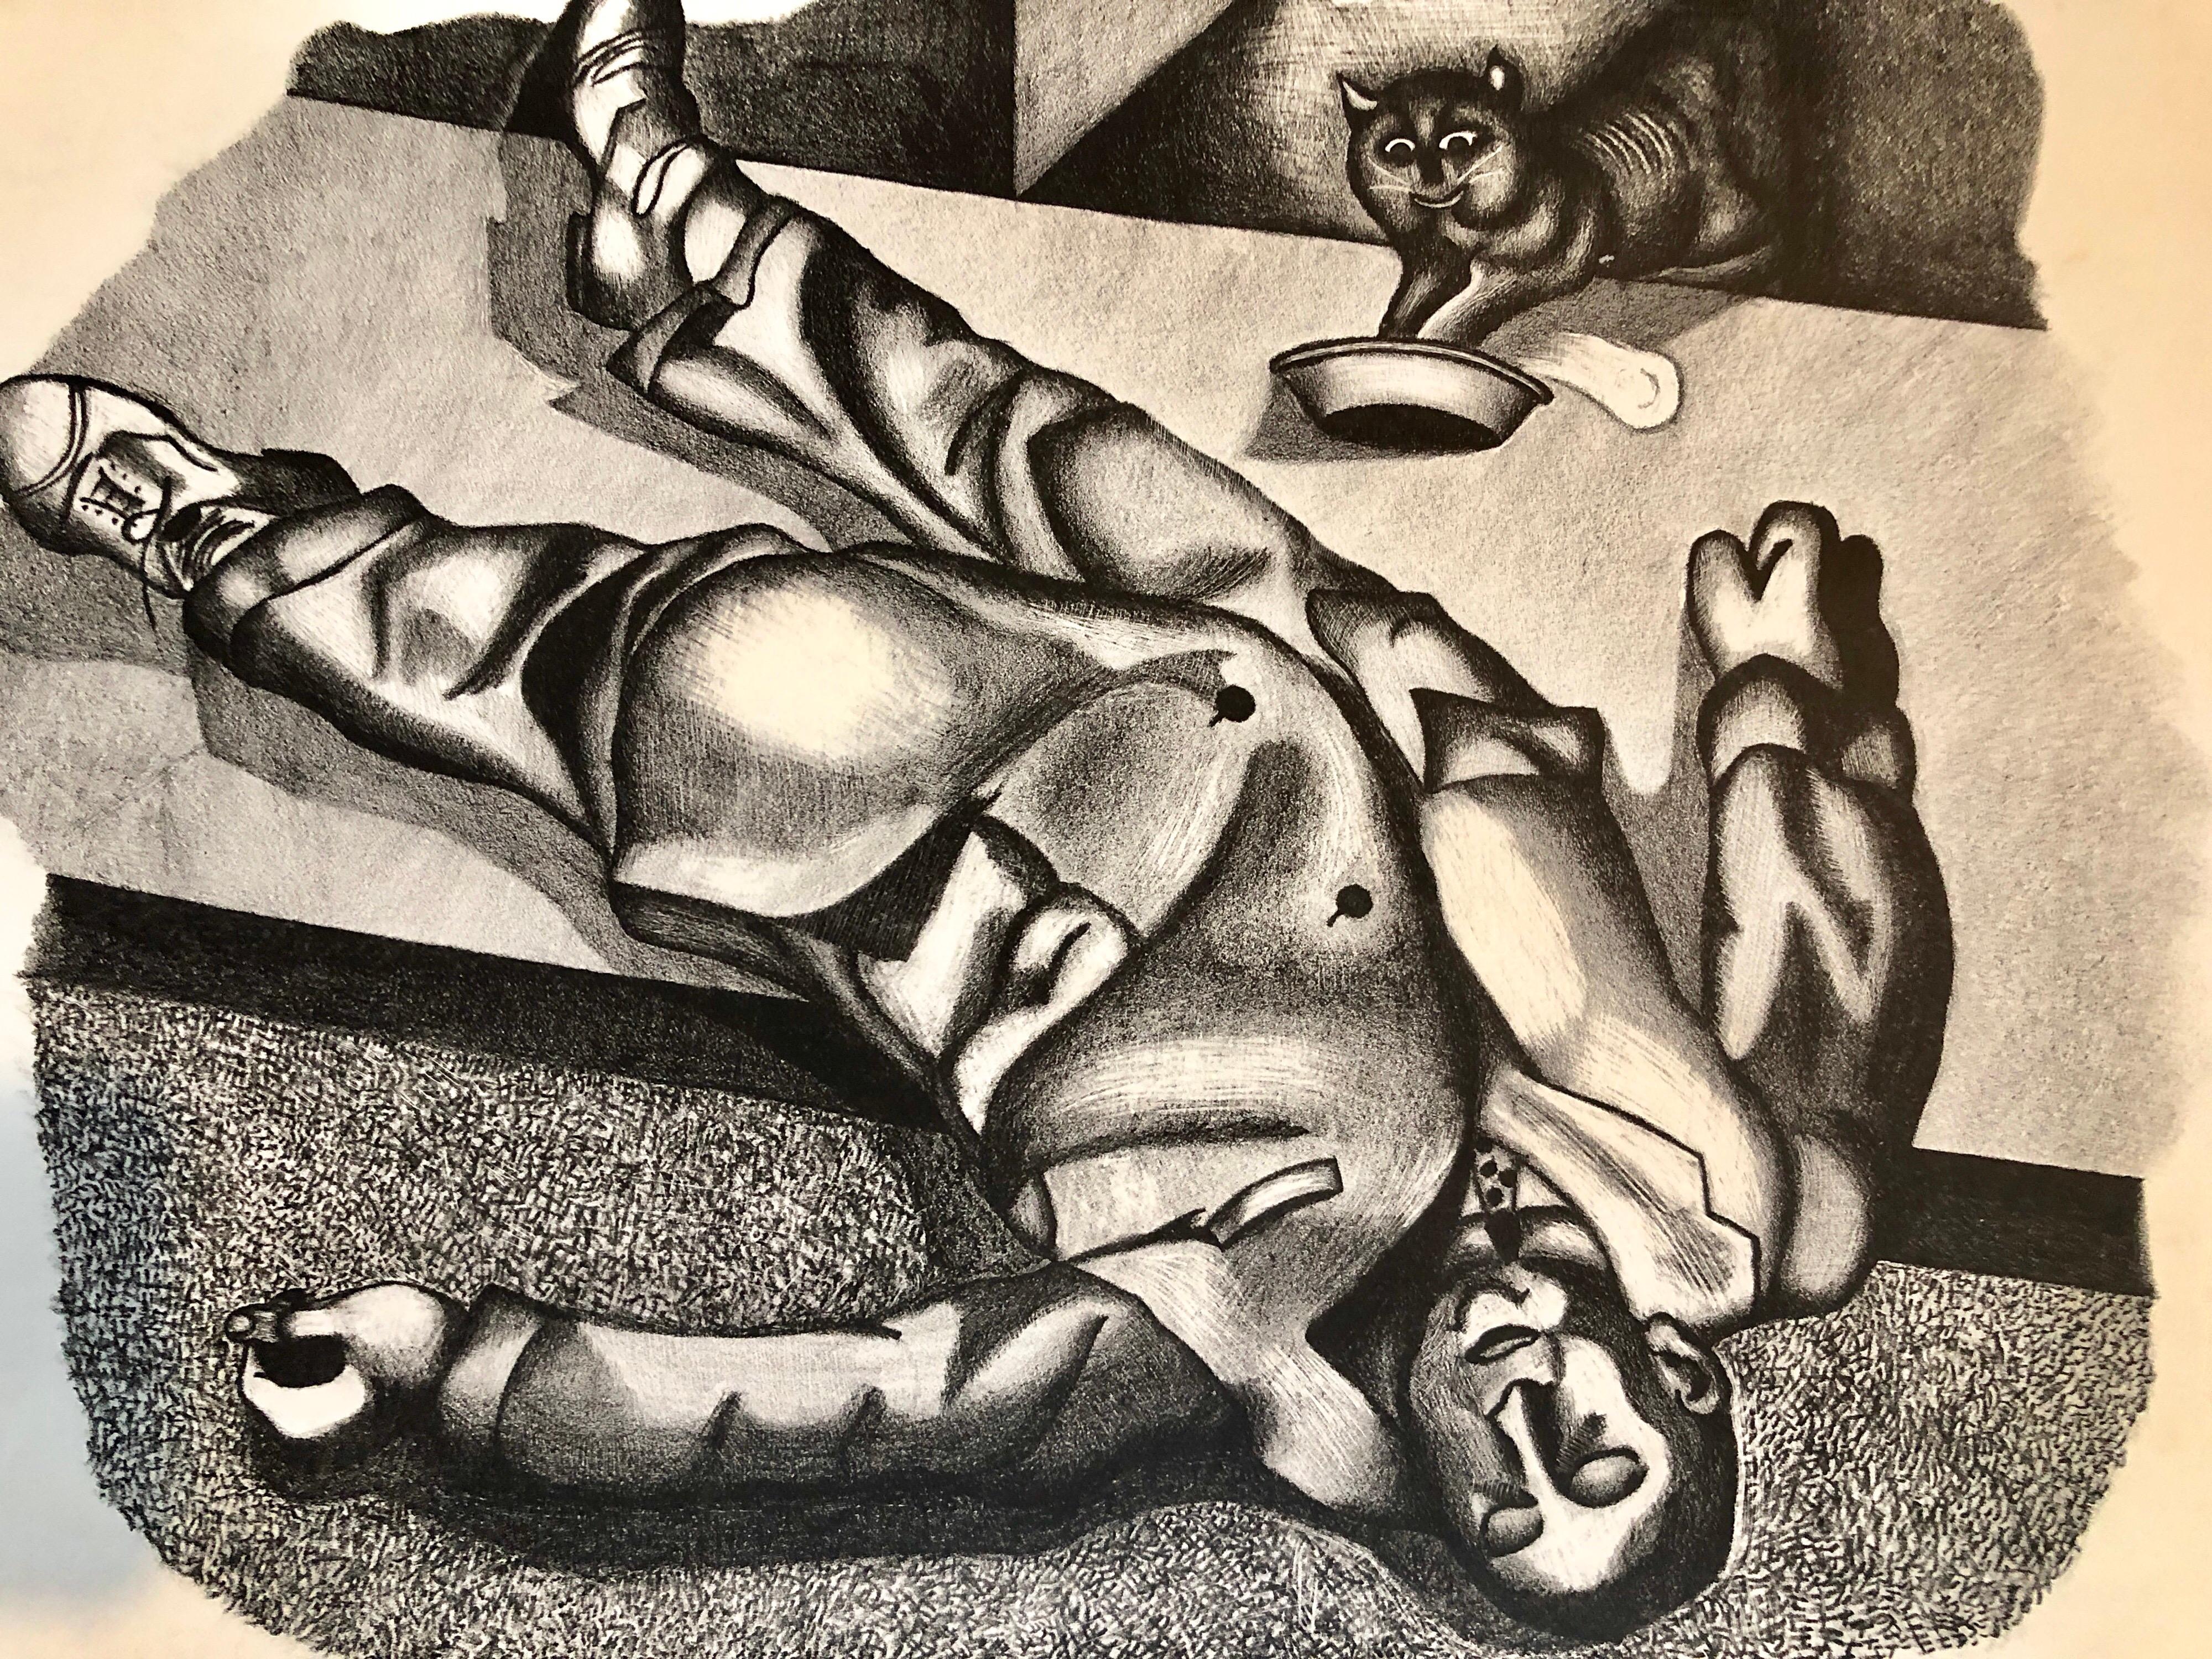 Recumbent on 11th st. NYC Drunk 1930's Social Realist Lithograph - Print by Julien Alberts